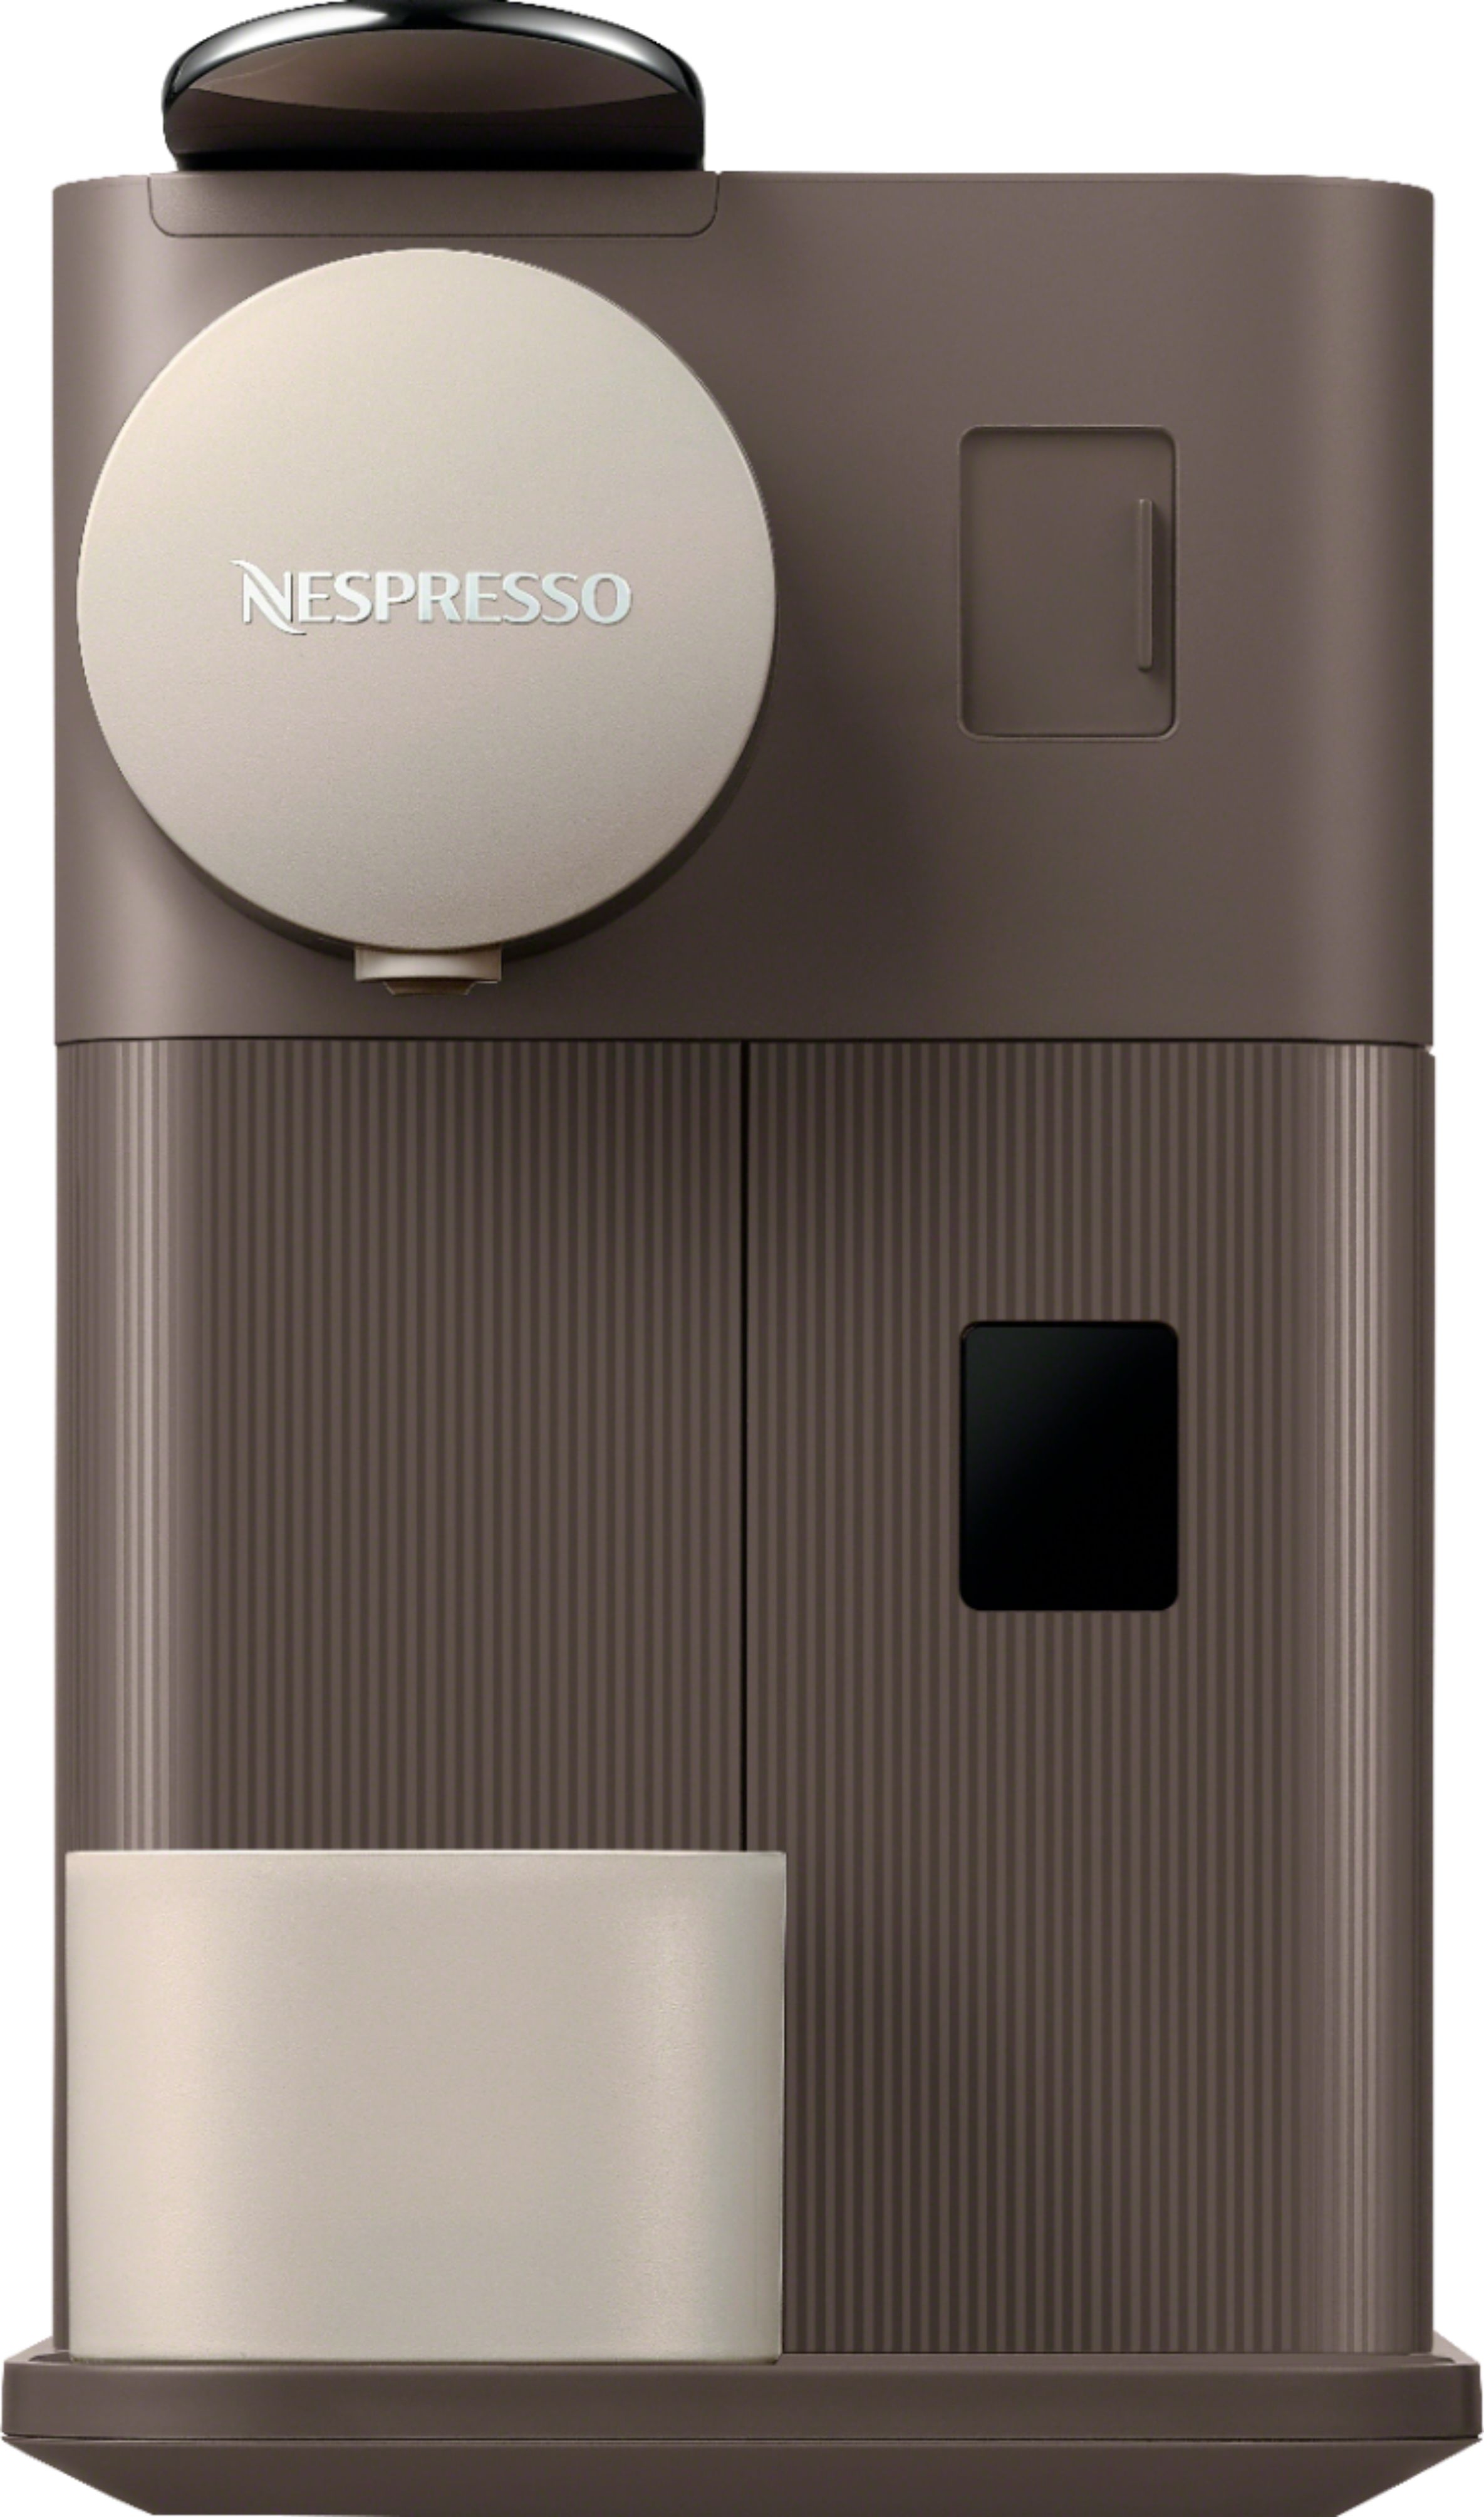 Nespresso Lattissima One Review: My Honest Thoughts (+Is It For YOU?) 2022